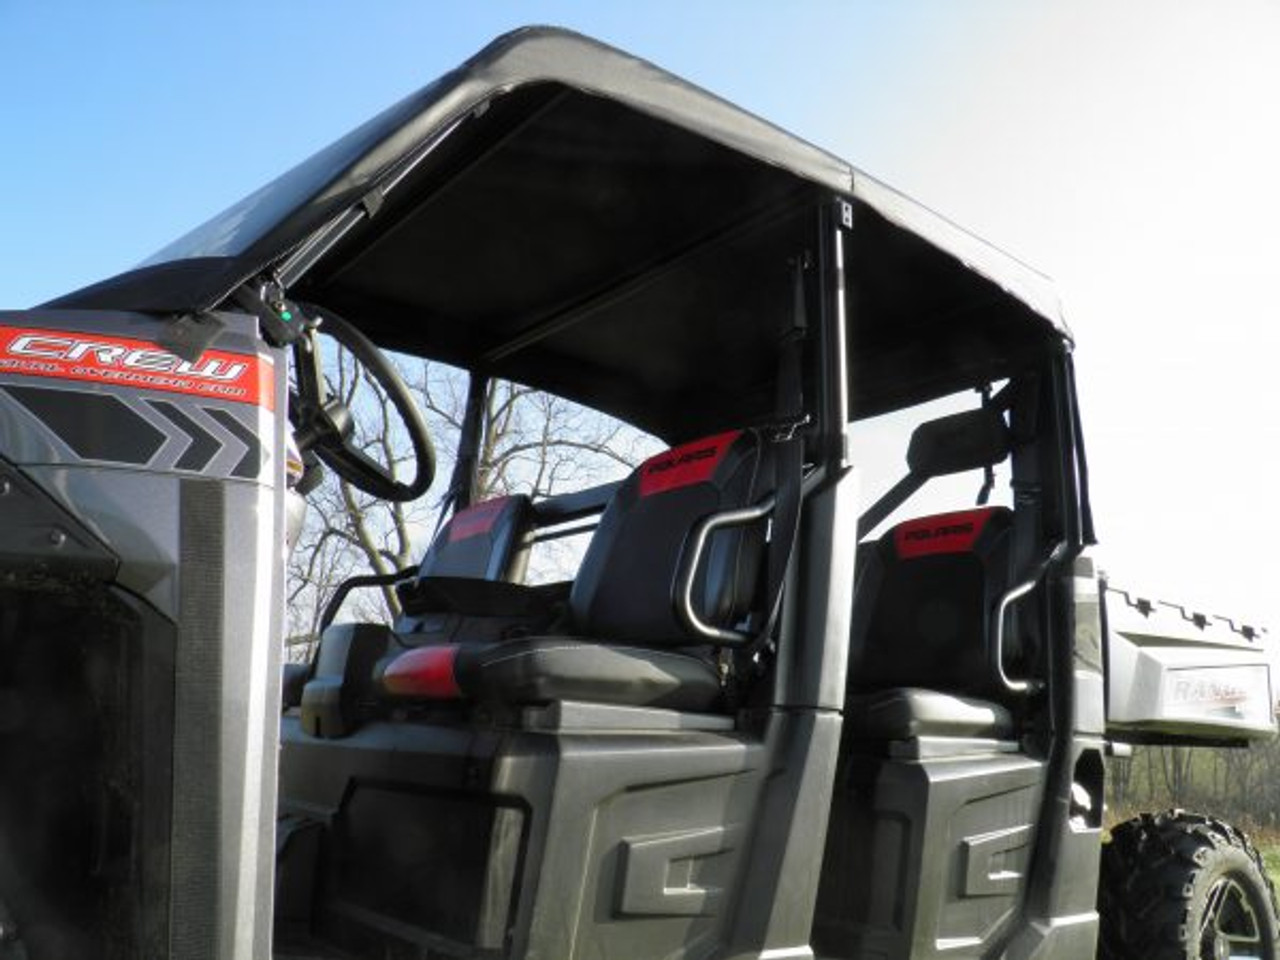 3 Star side x side Polaris Ranger Crew 900, XP900, 900-5, 900-6, 1000, XP1000, XP570-6 vinyl windshield top and rear window side view close up